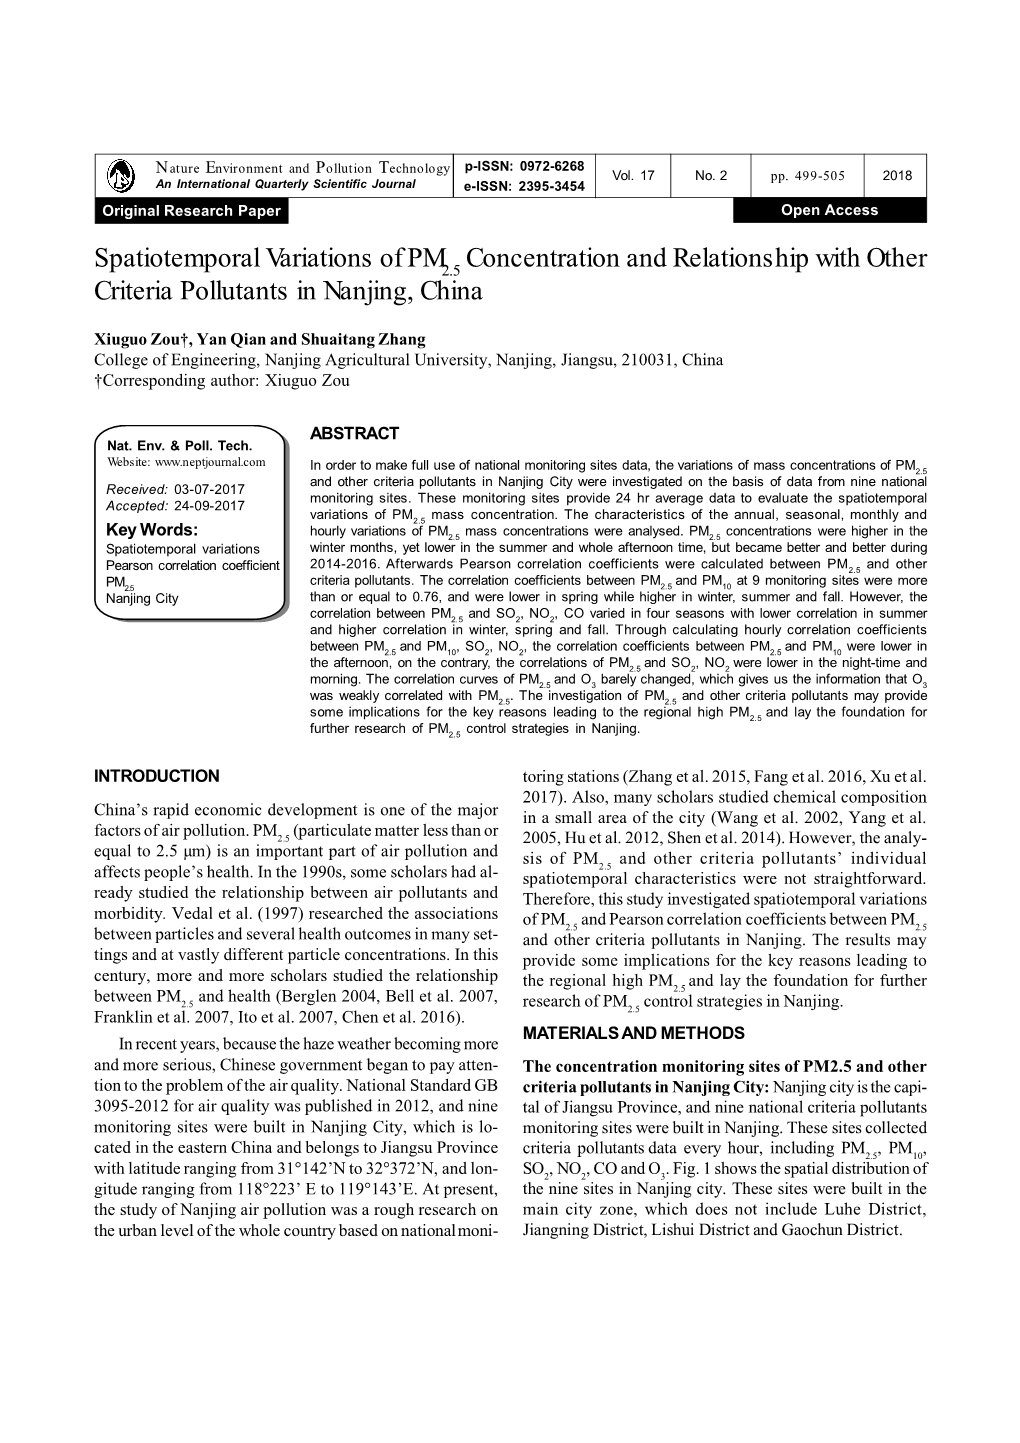 Spatiotemporal Variations of PM Concentration and Relationship